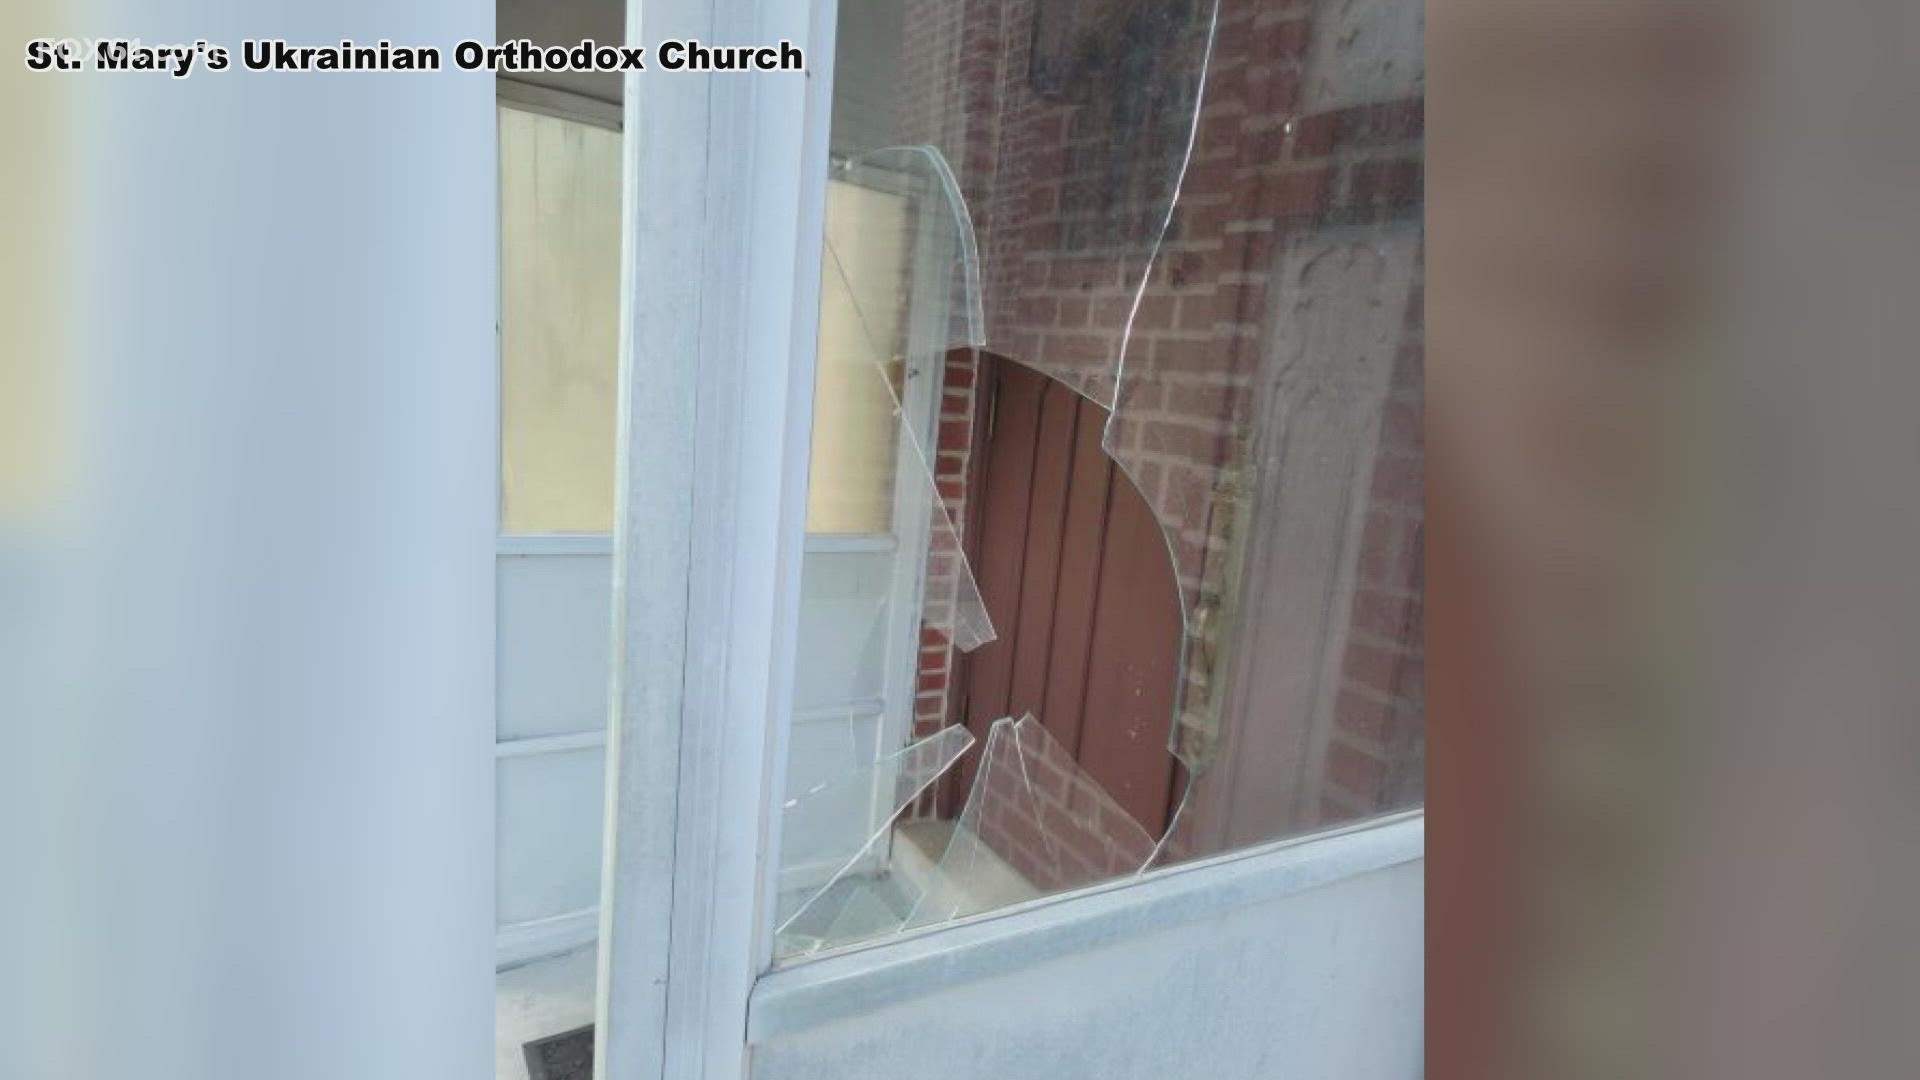 This is the second time since the war in Ukraine that the church has been vandalized.